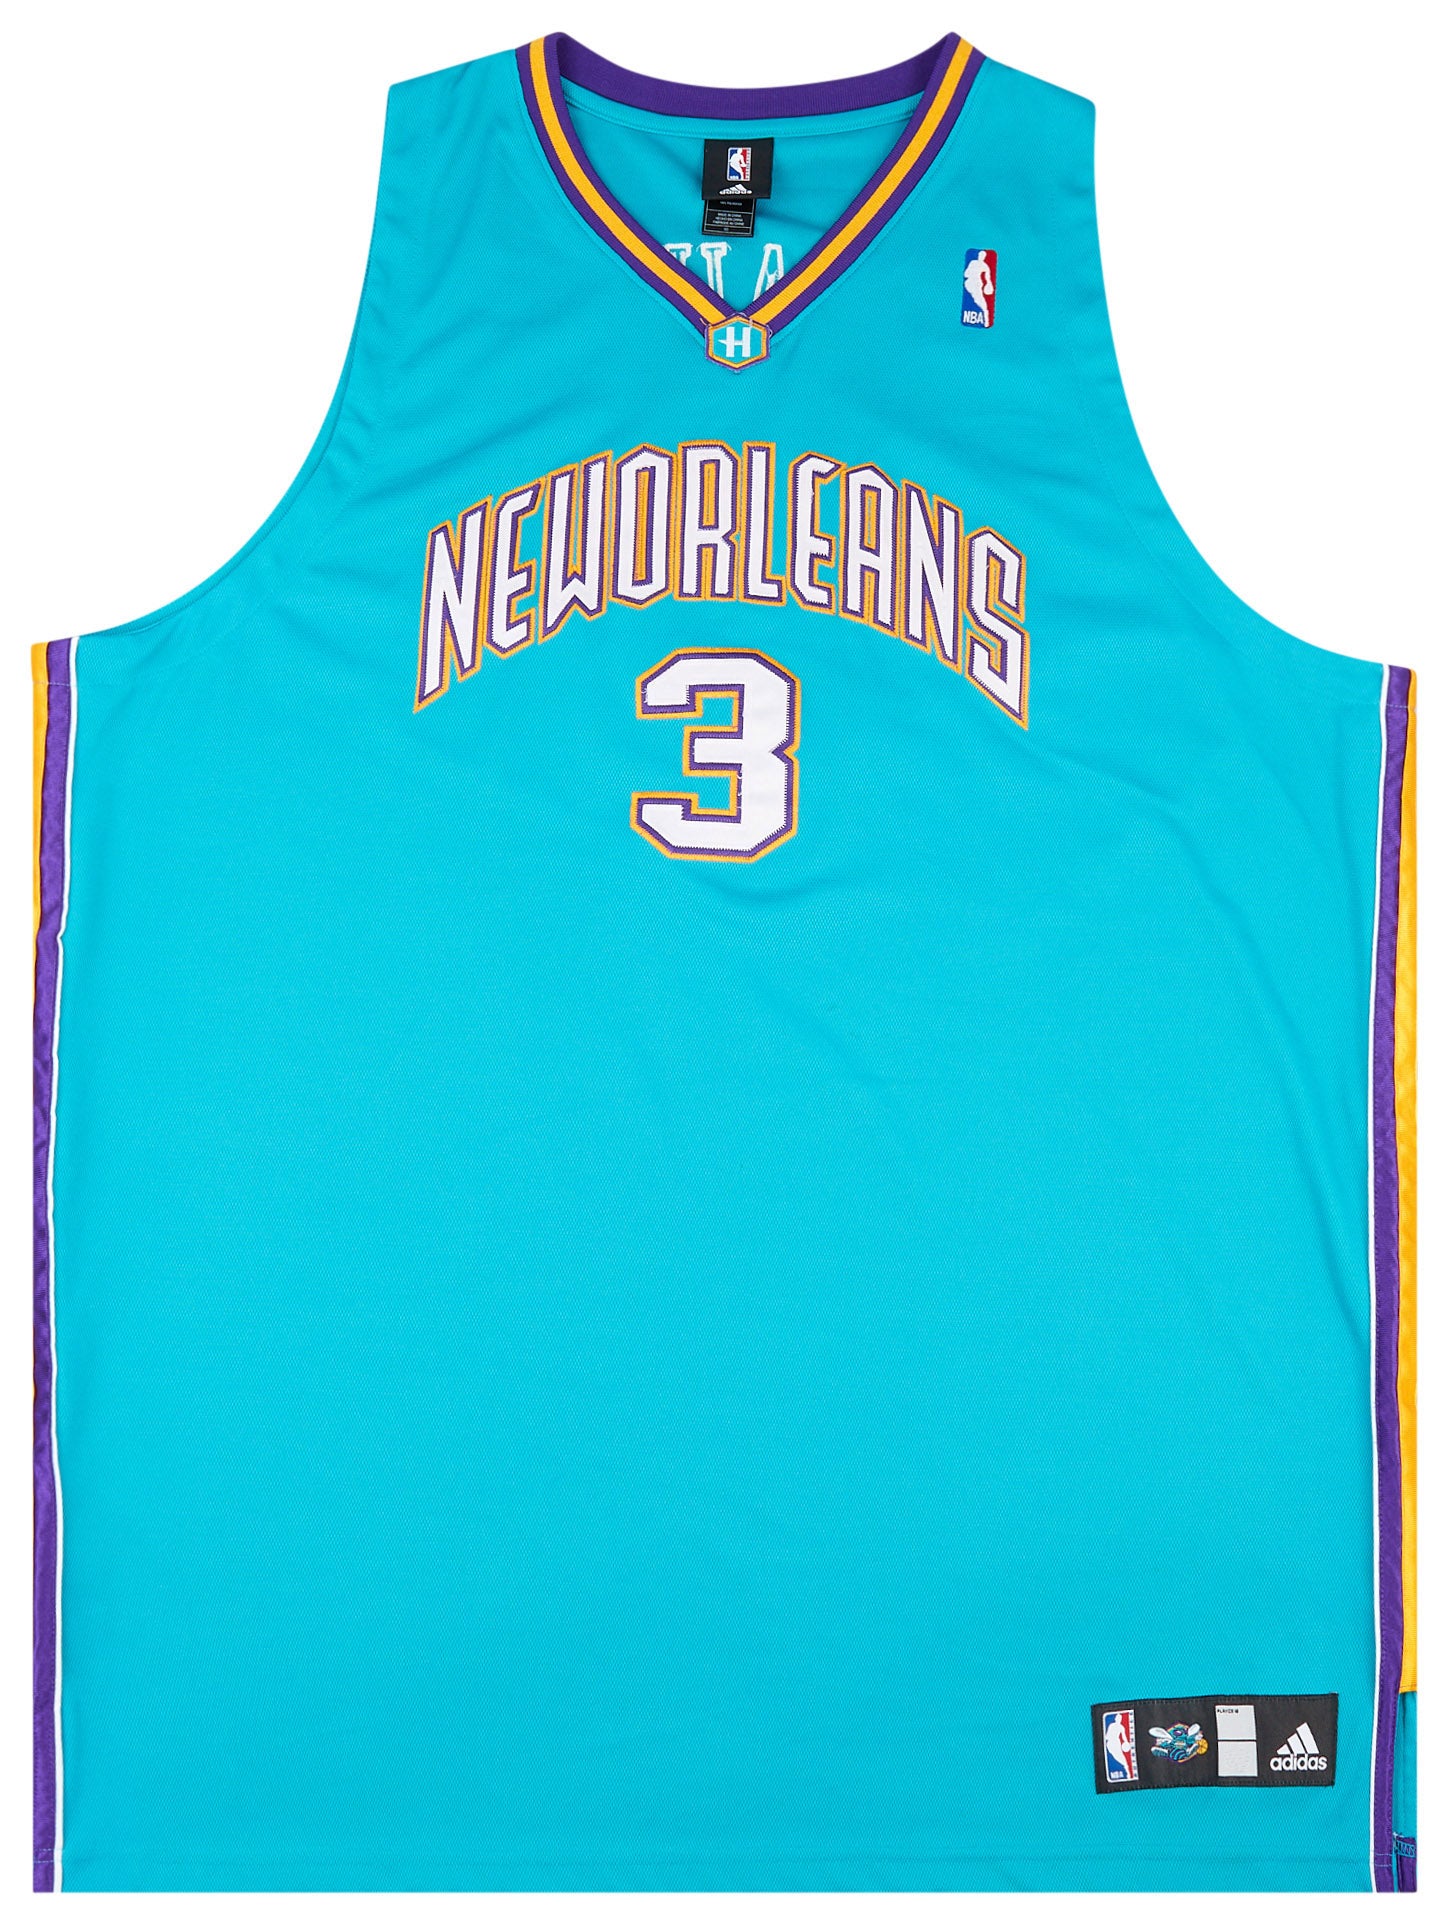 2006-08 AUTHENTIC NEW ORLEANS HORNETS PAUL #3 ADIDAS JERSEY (AWAY) 4XL